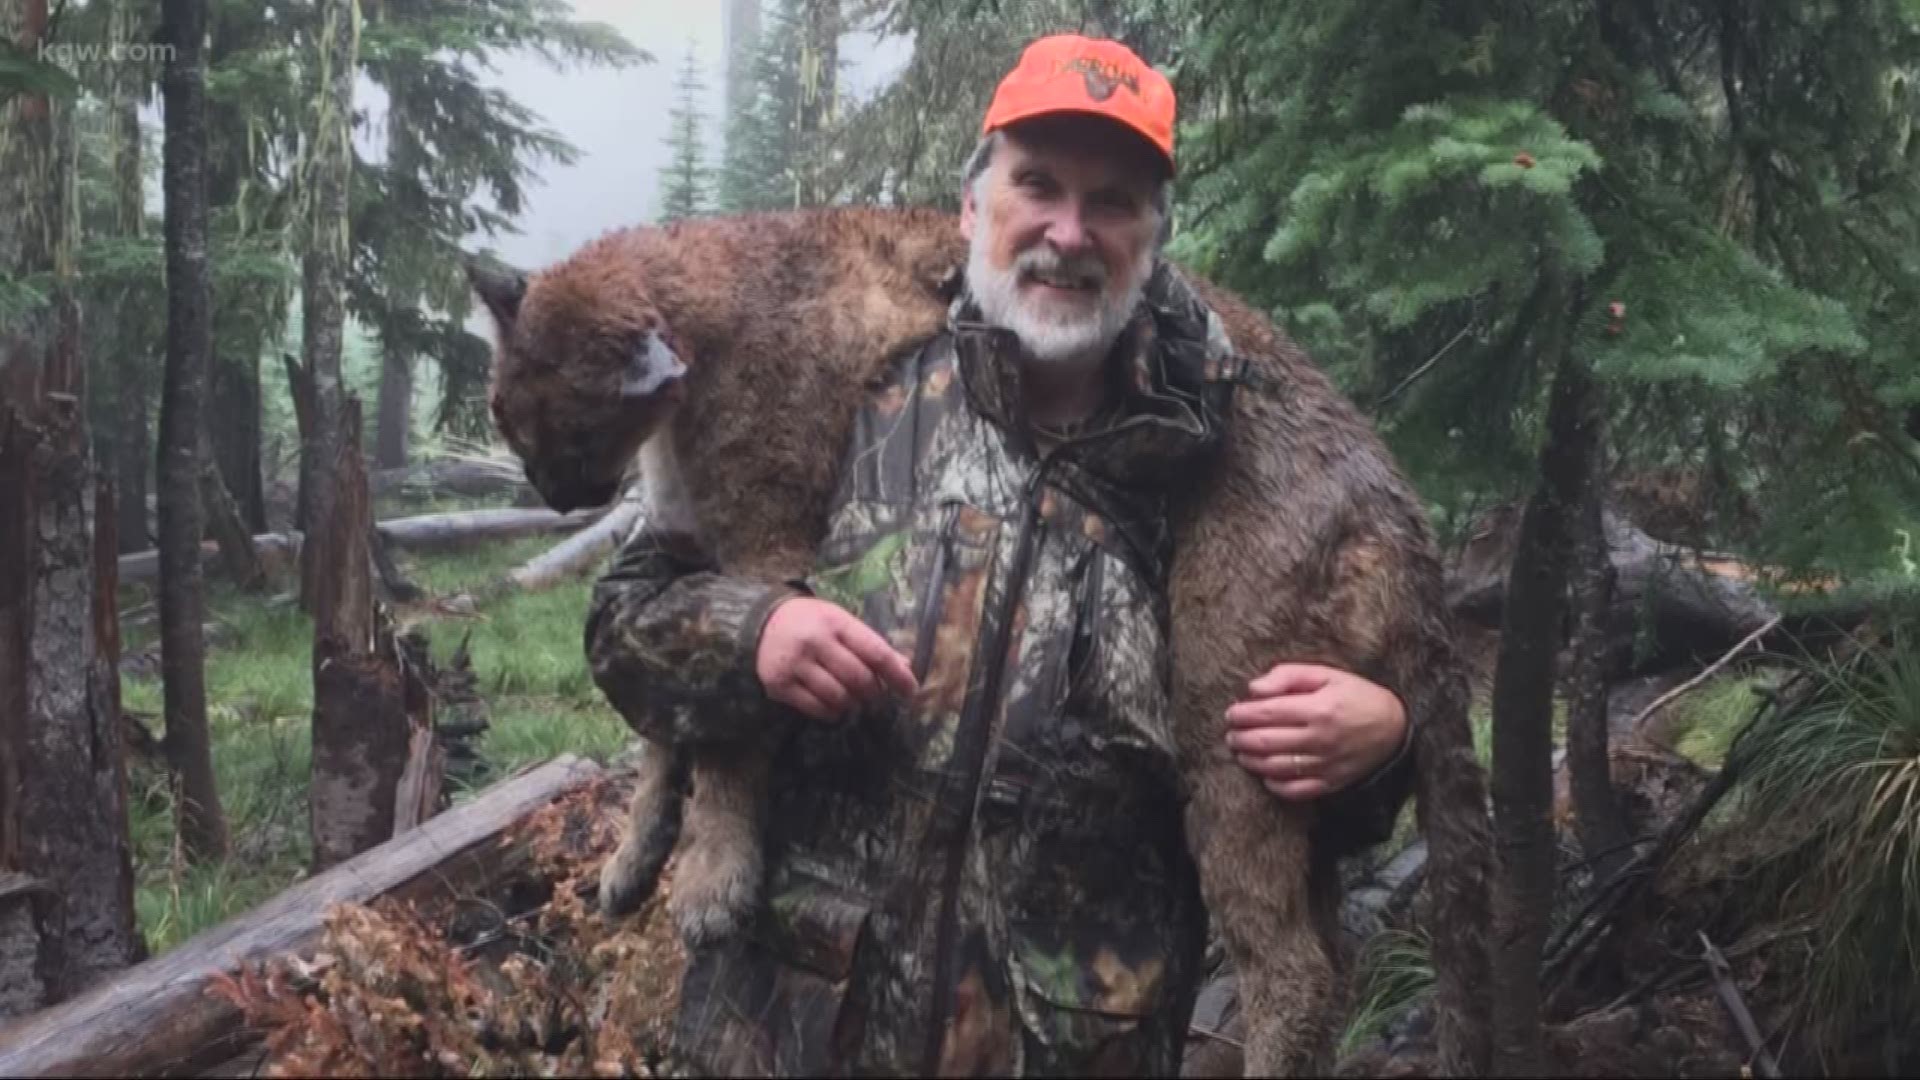 Billy Nylund says in about 12 years of living and hunting near Mount Hood, he's seen a lot of things. But up until last weekend, he had never run into a trio of cougars.